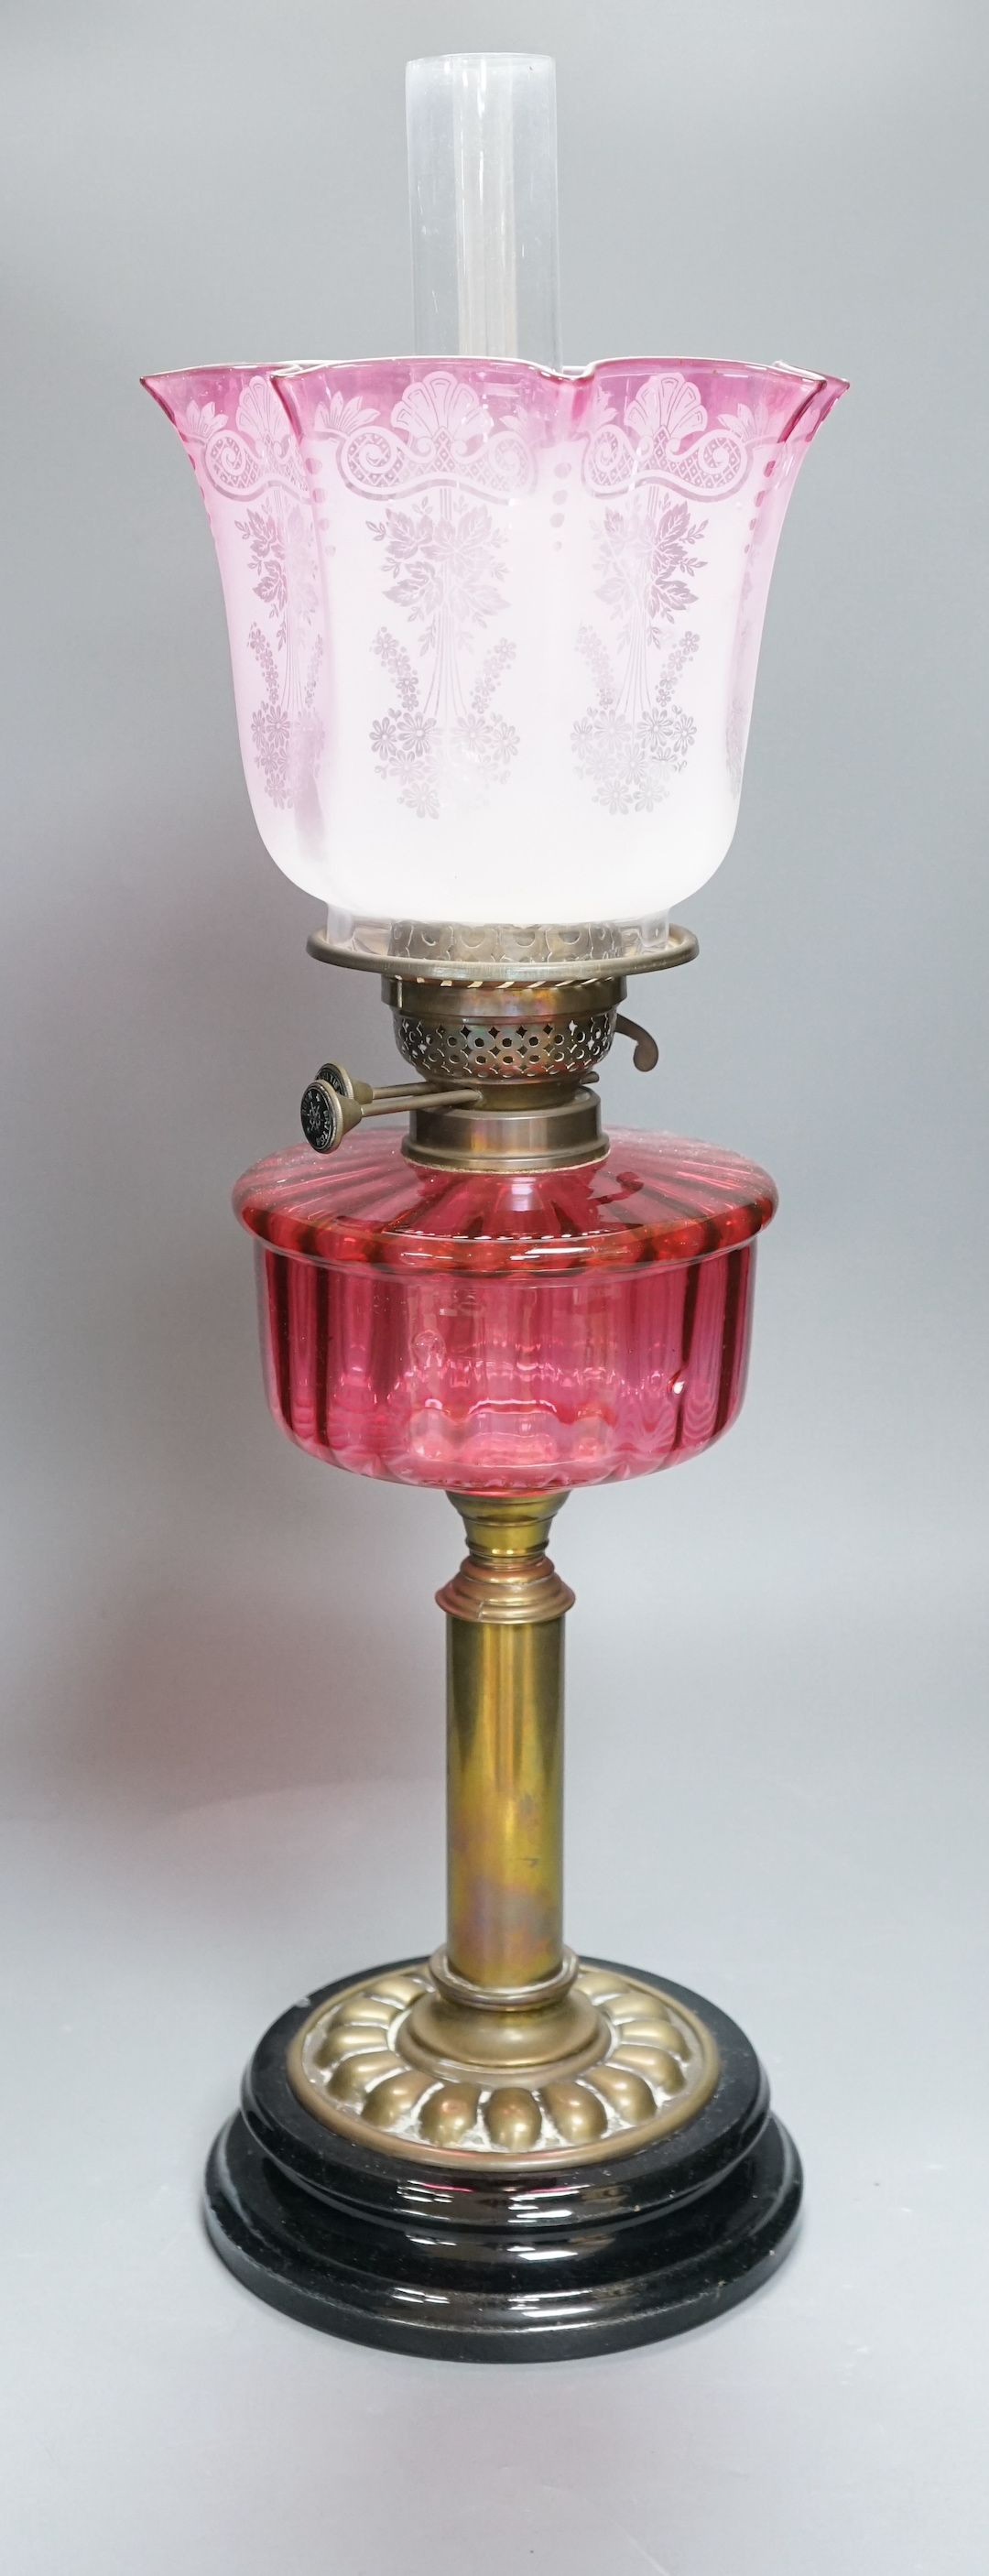 A 19th century cranberry and brass oil lamp with original cranberry shade, height 65cms including glass funnel